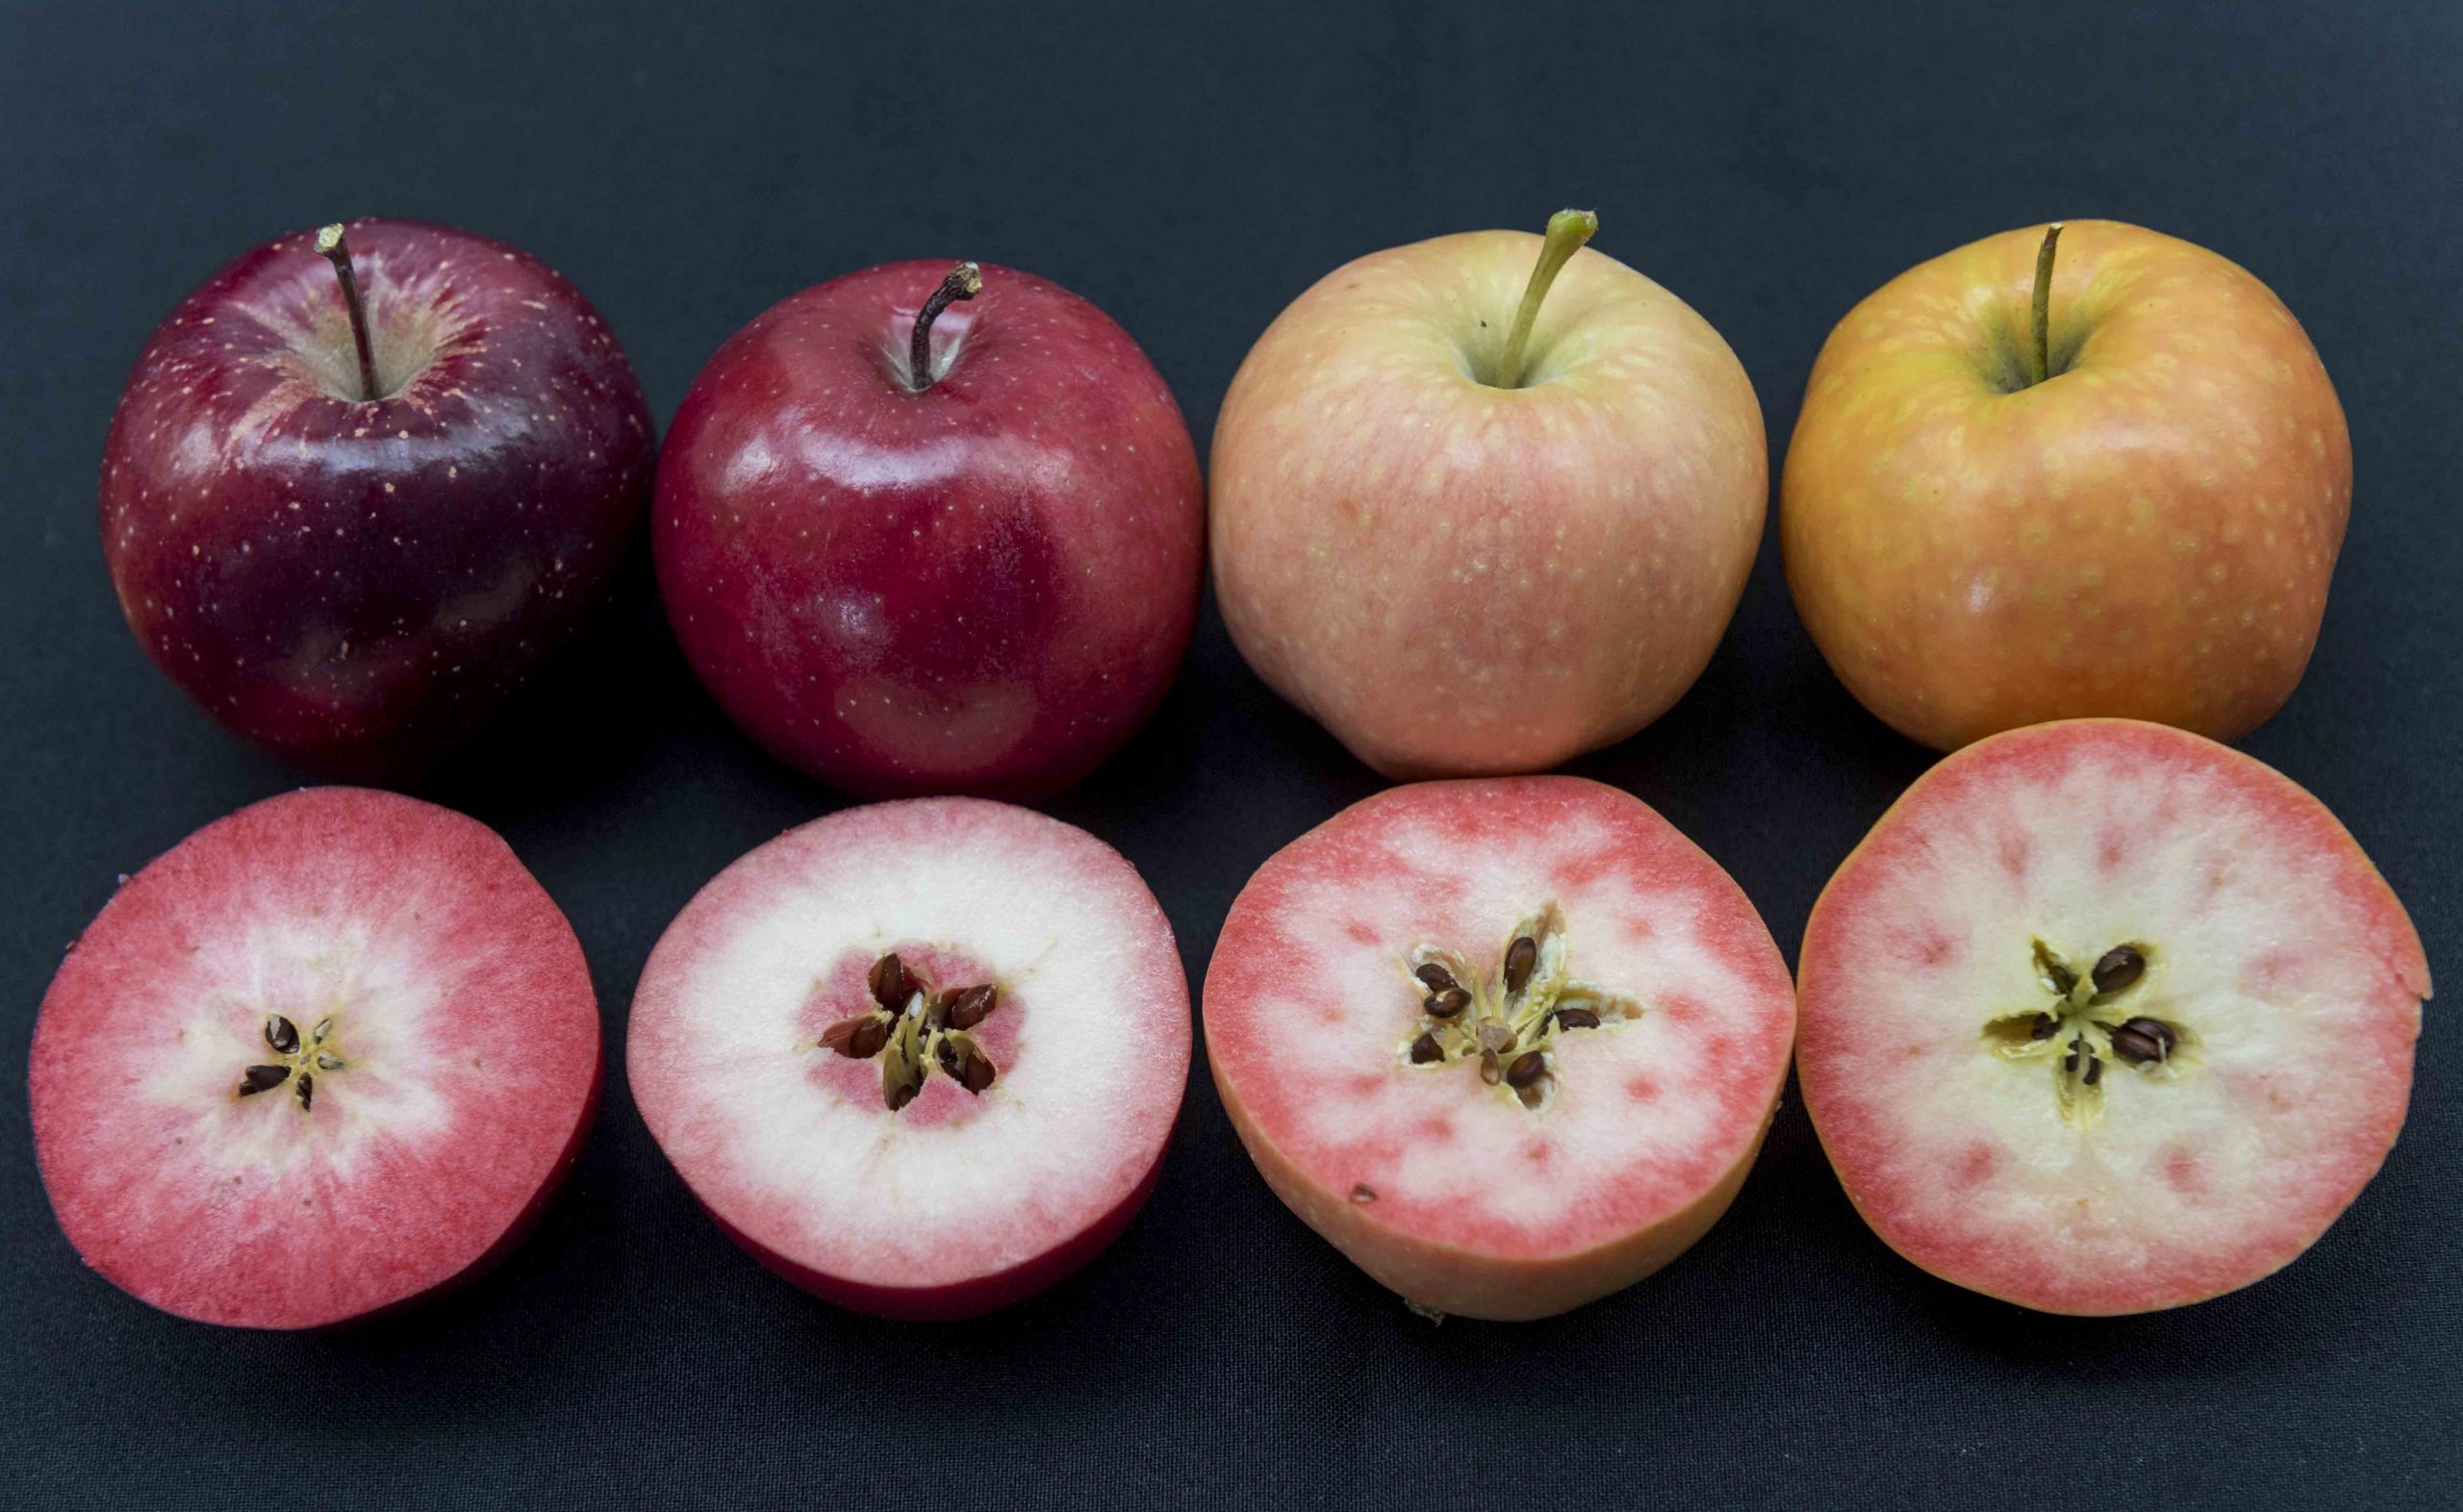 Ifored presented three new red-fleshed apple varieties at Fruit Attraction 2016.